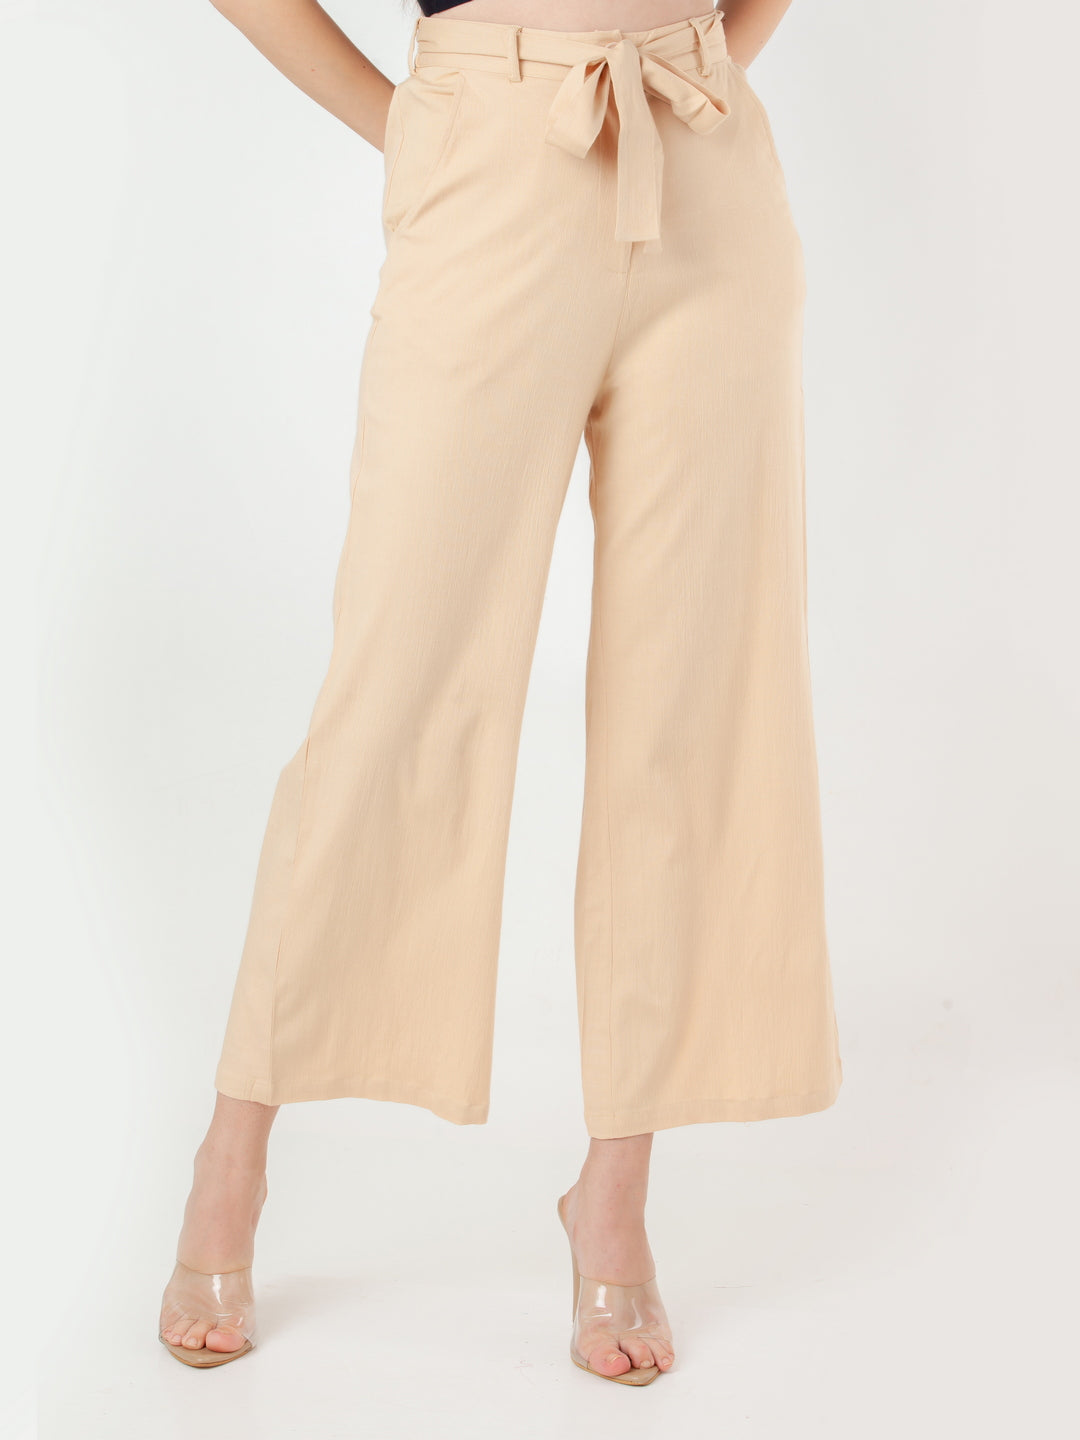 Beige-Solid-Straight-Trouser-L00833_2